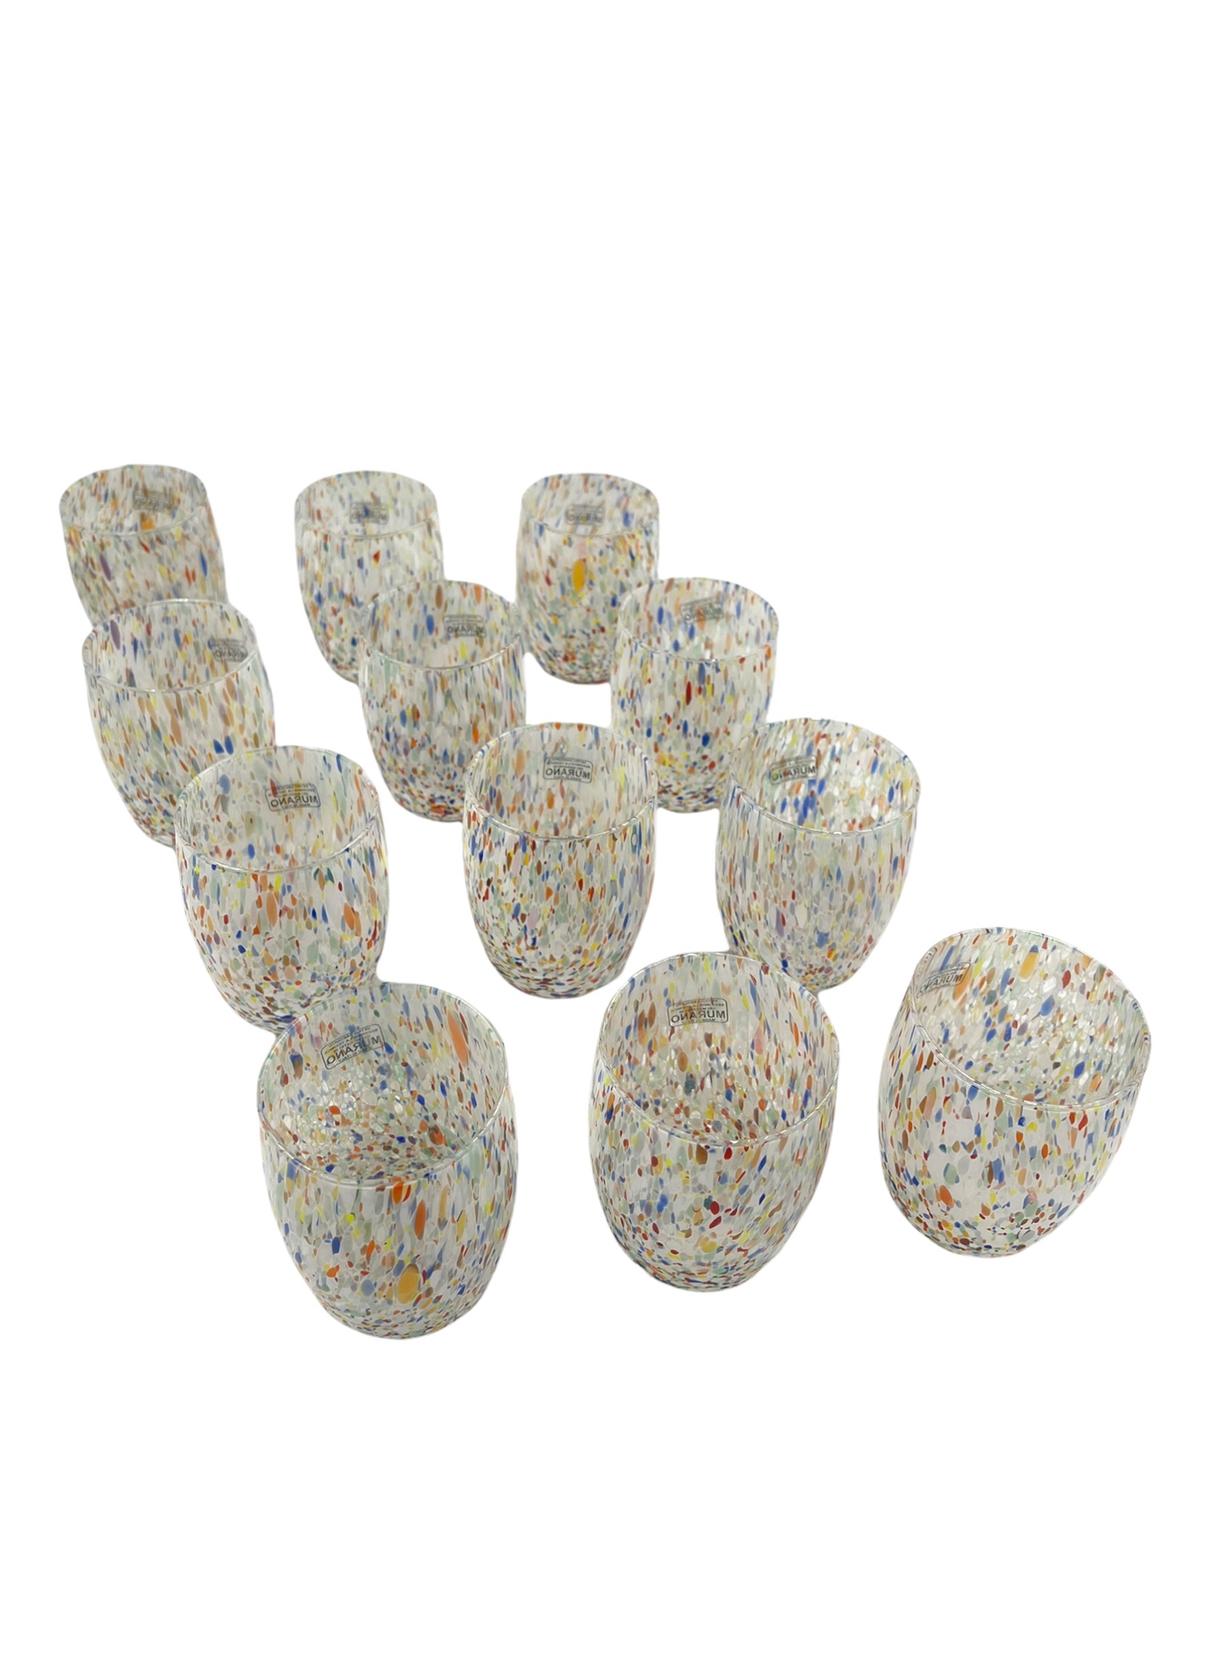 Speckled Italian Murano Dining Cups, Set of 12 For Sale 4